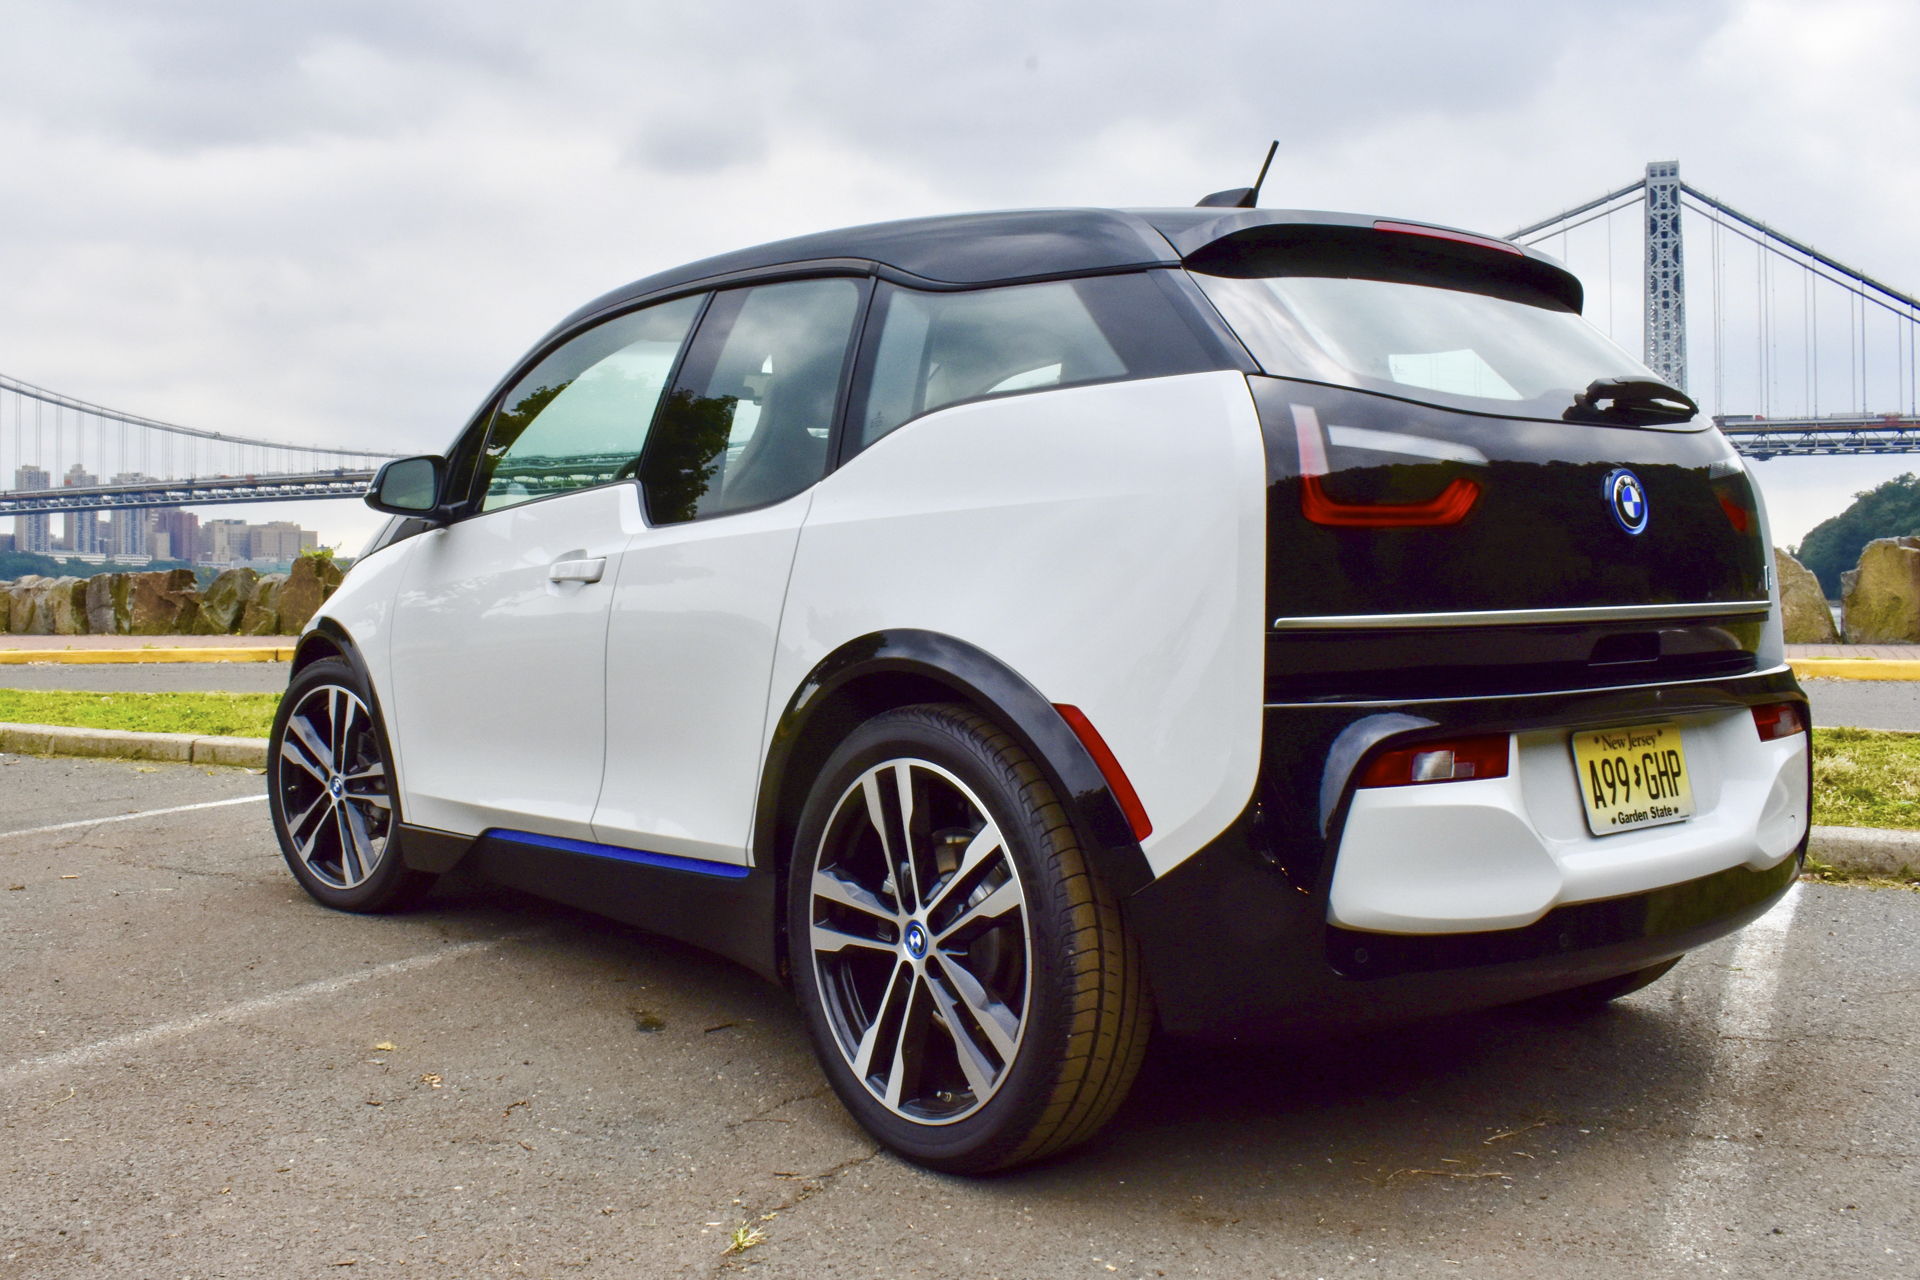 2019 BMW i3s Review: Futuristic And Fun, But Still Flawed